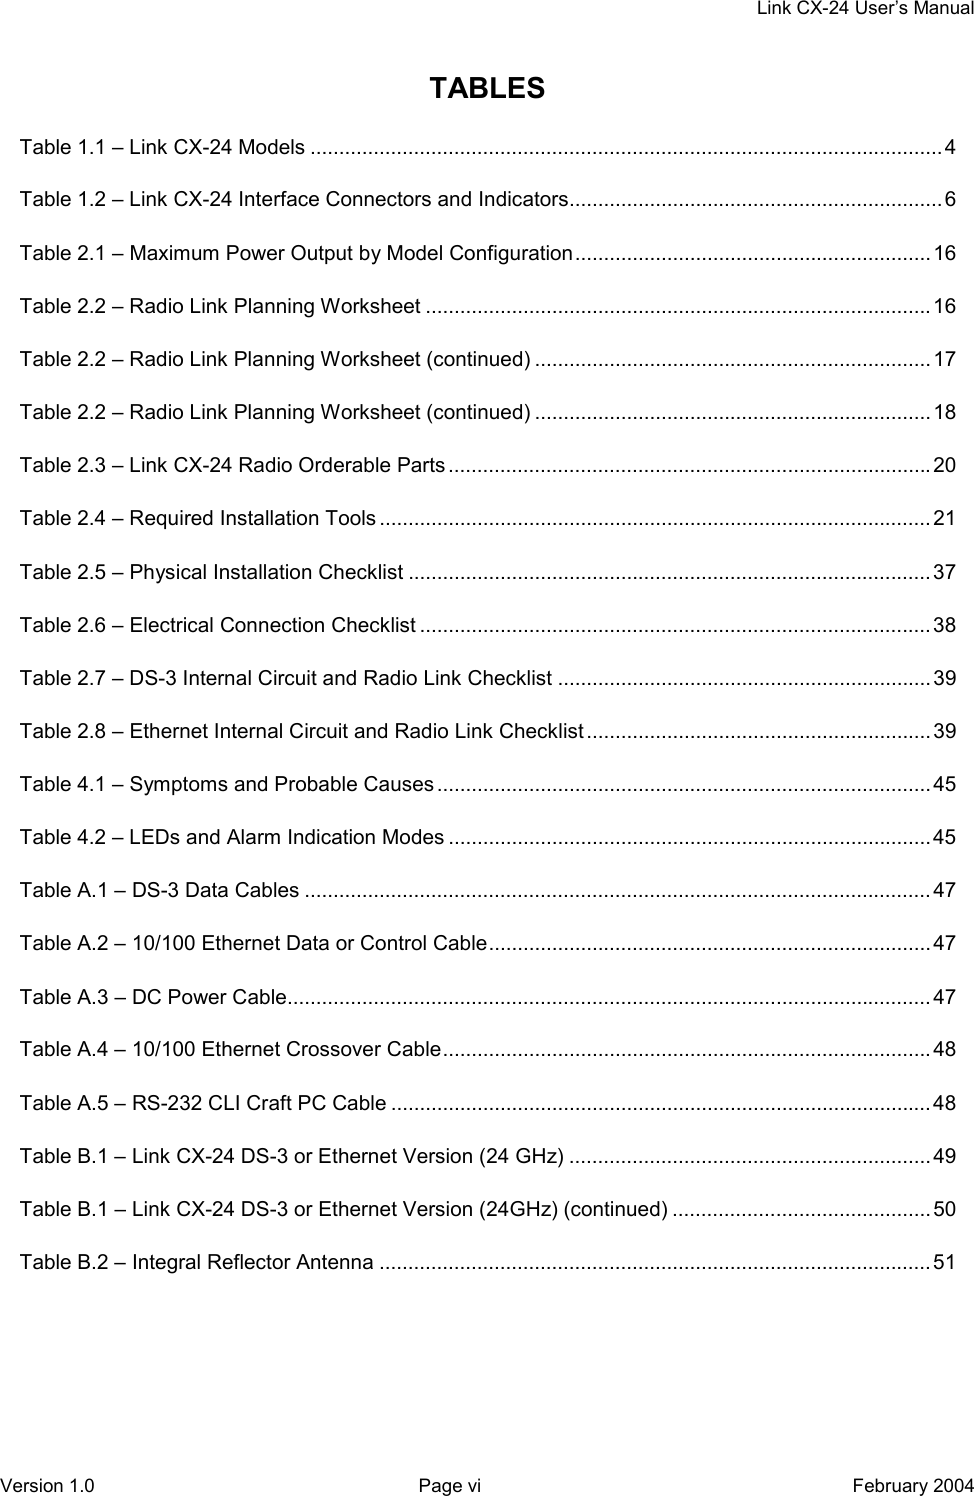     Link CX-24 User’s Manual Version 1.0  Page vi  February 2004 TABLES Table 1.1 – Link CX-24 Models .............................................................................................................. 4 Table 1.2 – Link CX-24 Interface Connectors and Indicators................................................................. 6 Table 2.1 – Maximum Power Output by Model Configuration.............................................................. 16 Table 2.2 – Radio Link Planning Worksheet ........................................................................................ 16 Table 2.2 – Radio Link Planning Worksheet (continued) .....................................................................17 Table 2.2 – Radio Link Planning Worksheet (continued) .....................................................................18 Table 2.3 – Link CX-24 Radio Orderable Parts ....................................................................................20 Table 2.4 – Required Installation Tools ................................................................................................21 Table 2.5 – Physical Installation Checklist ...........................................................................................37 Table 2.6 – Electrical Connection Checklist .........................................................................................38 Table 2.7 – DS-3 Internal Circuit and Radio Link Checklist .................................................................39 Table 2.8 – Ethernet Internal Circuit and Radio Link Checklist ............................................................ 39 Table 4.1 – Symptoms and Probable Causes ...................................................................................... 45 Table 4.2 – LEDs and Alarm Indication Modes ....................................................................................45 Table A.1 – DS-3 Data Cables ............................................................................................................. 47 Table A.2 – 10/100 Ethernet Data or Control Cable............................................................................. 47 Table A.3 – DC Power Cable................................................................................................................47 Table A.4 – 10/100 Ethernet Crossover Cable.....................................................................................48 Table A.5 – RS-232 CLI Craft PC Cable ..............................................................................................48 Table B.1 – Link CX-24 DS-3 or Ethernet Version (24 GHz) ...............................................................49 Table B.1 – Link CX-24 DS-3 or Ethernet Version (24GHz) (continued) ............................................. 50 Table B.2 – Integral Reflector Antenna ................................................................................................ 51  